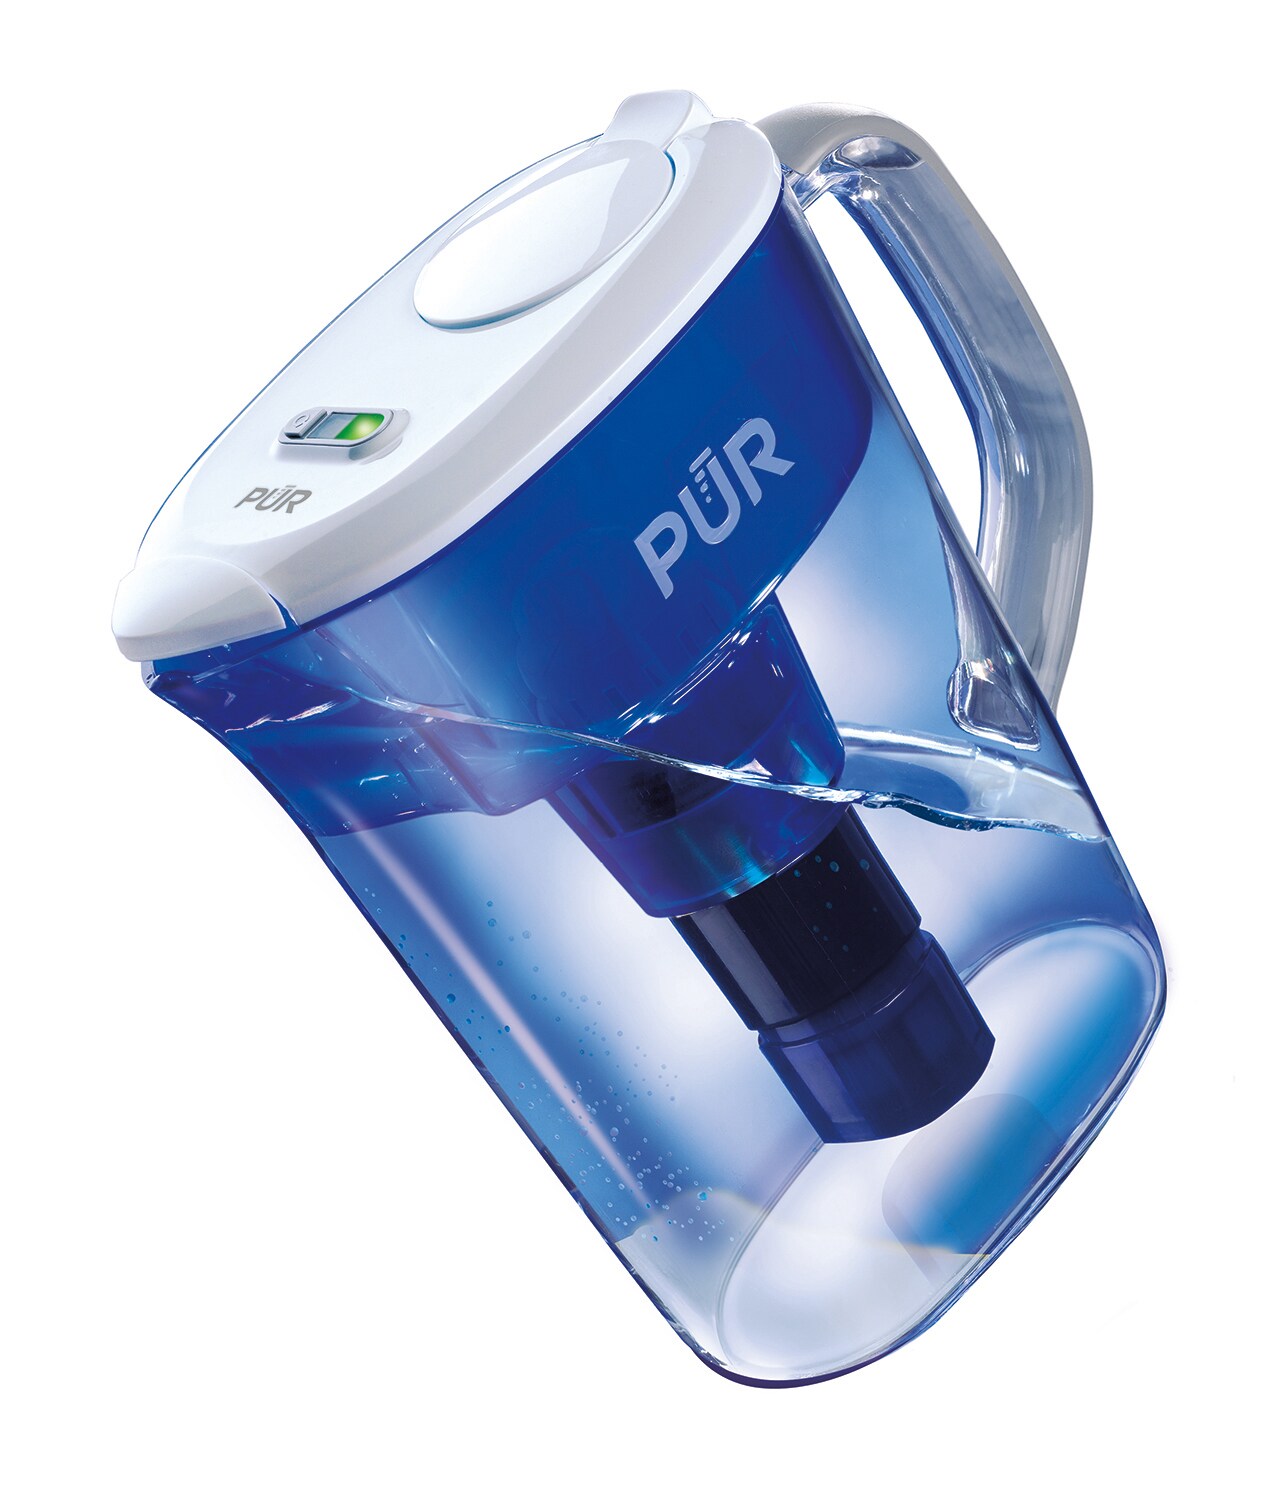 PUR Water Pitcher Filtration System 7 Cup Blush